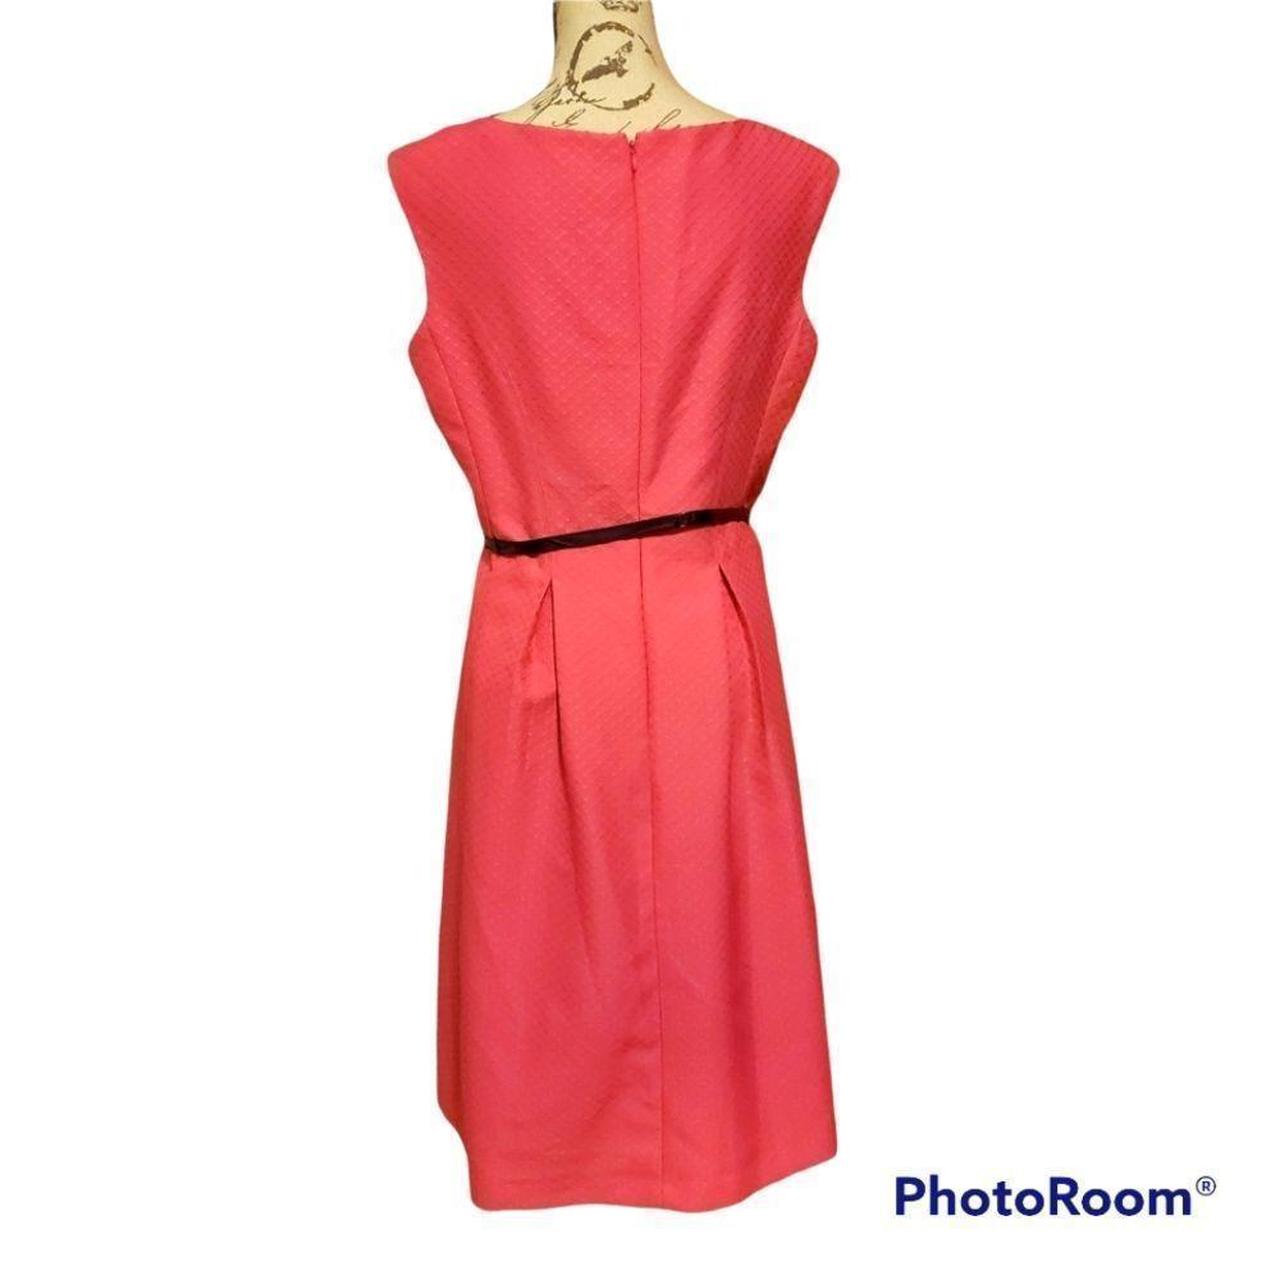 Product Image 4 - Belted patent bow dress. Textured